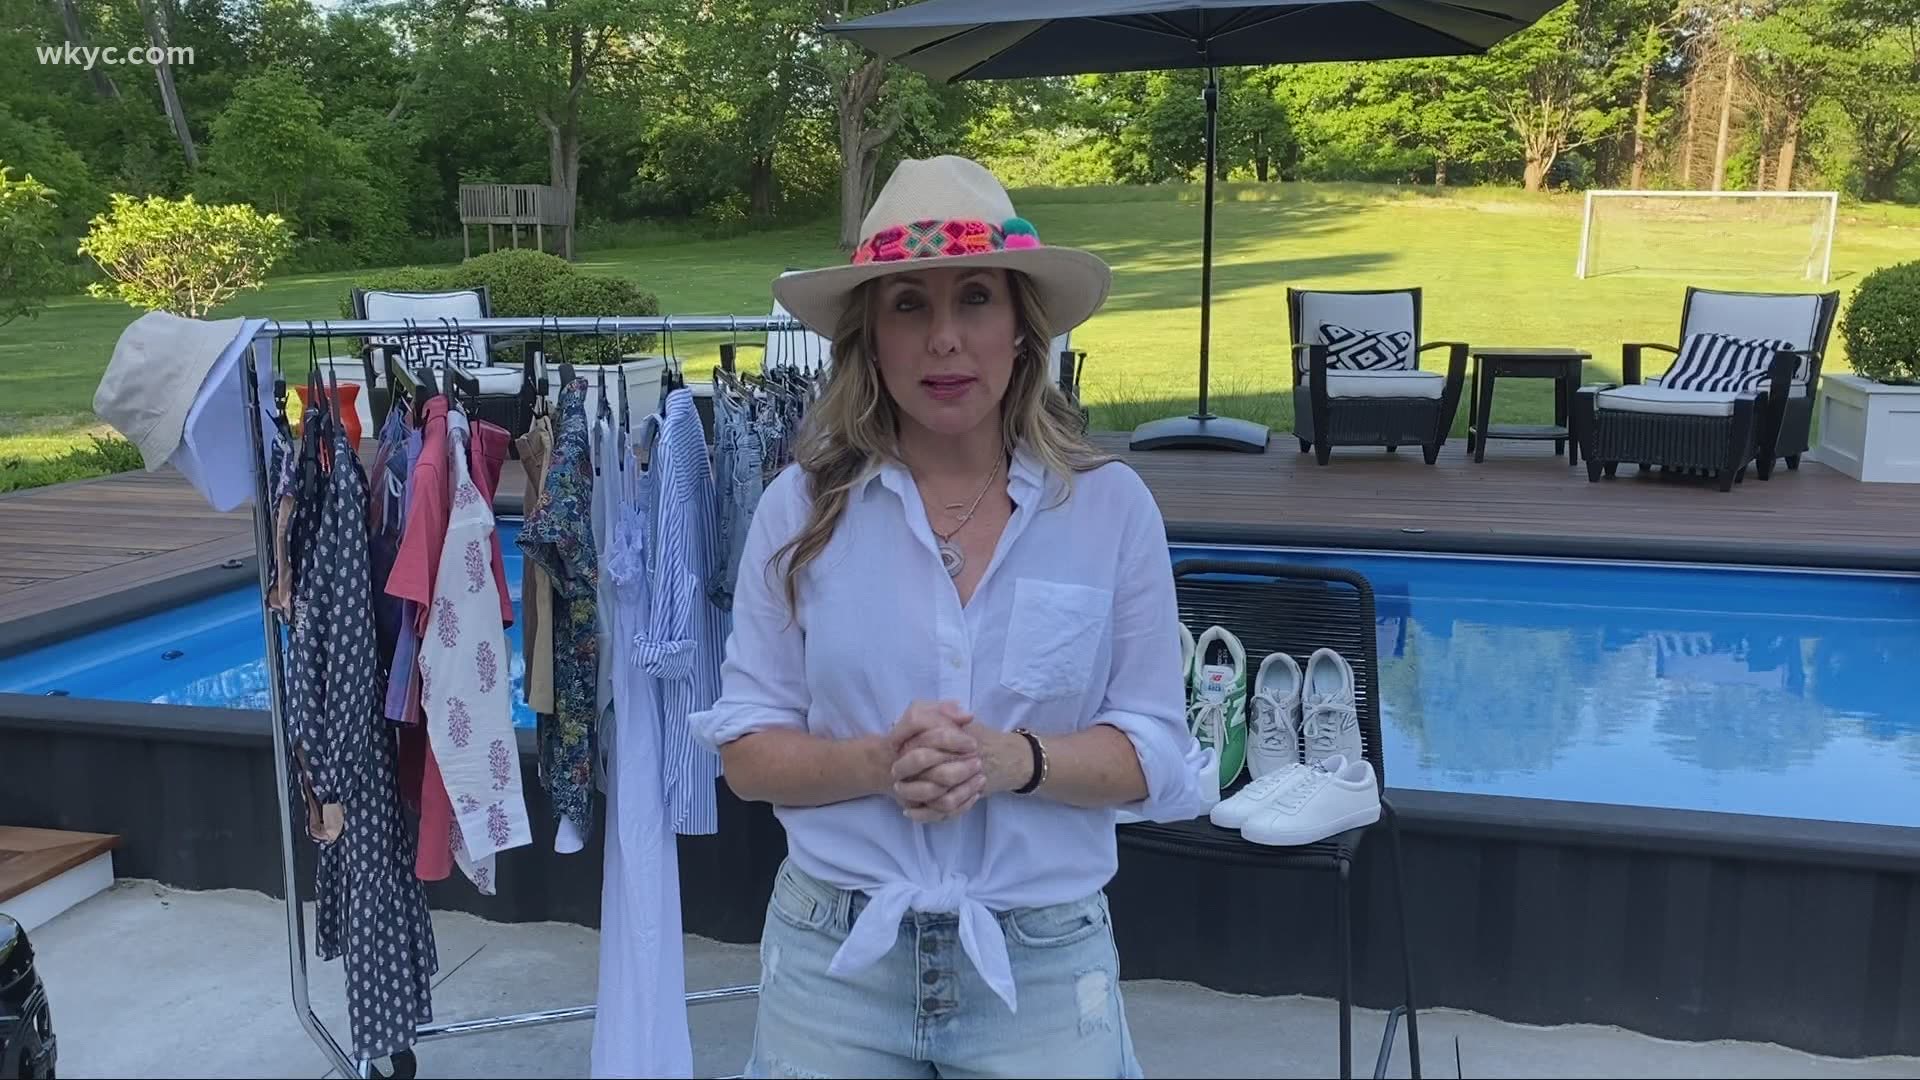 Our wardrobe consultant Hallie Abrams shows us four current summer fashion trends. They won't break the bank!